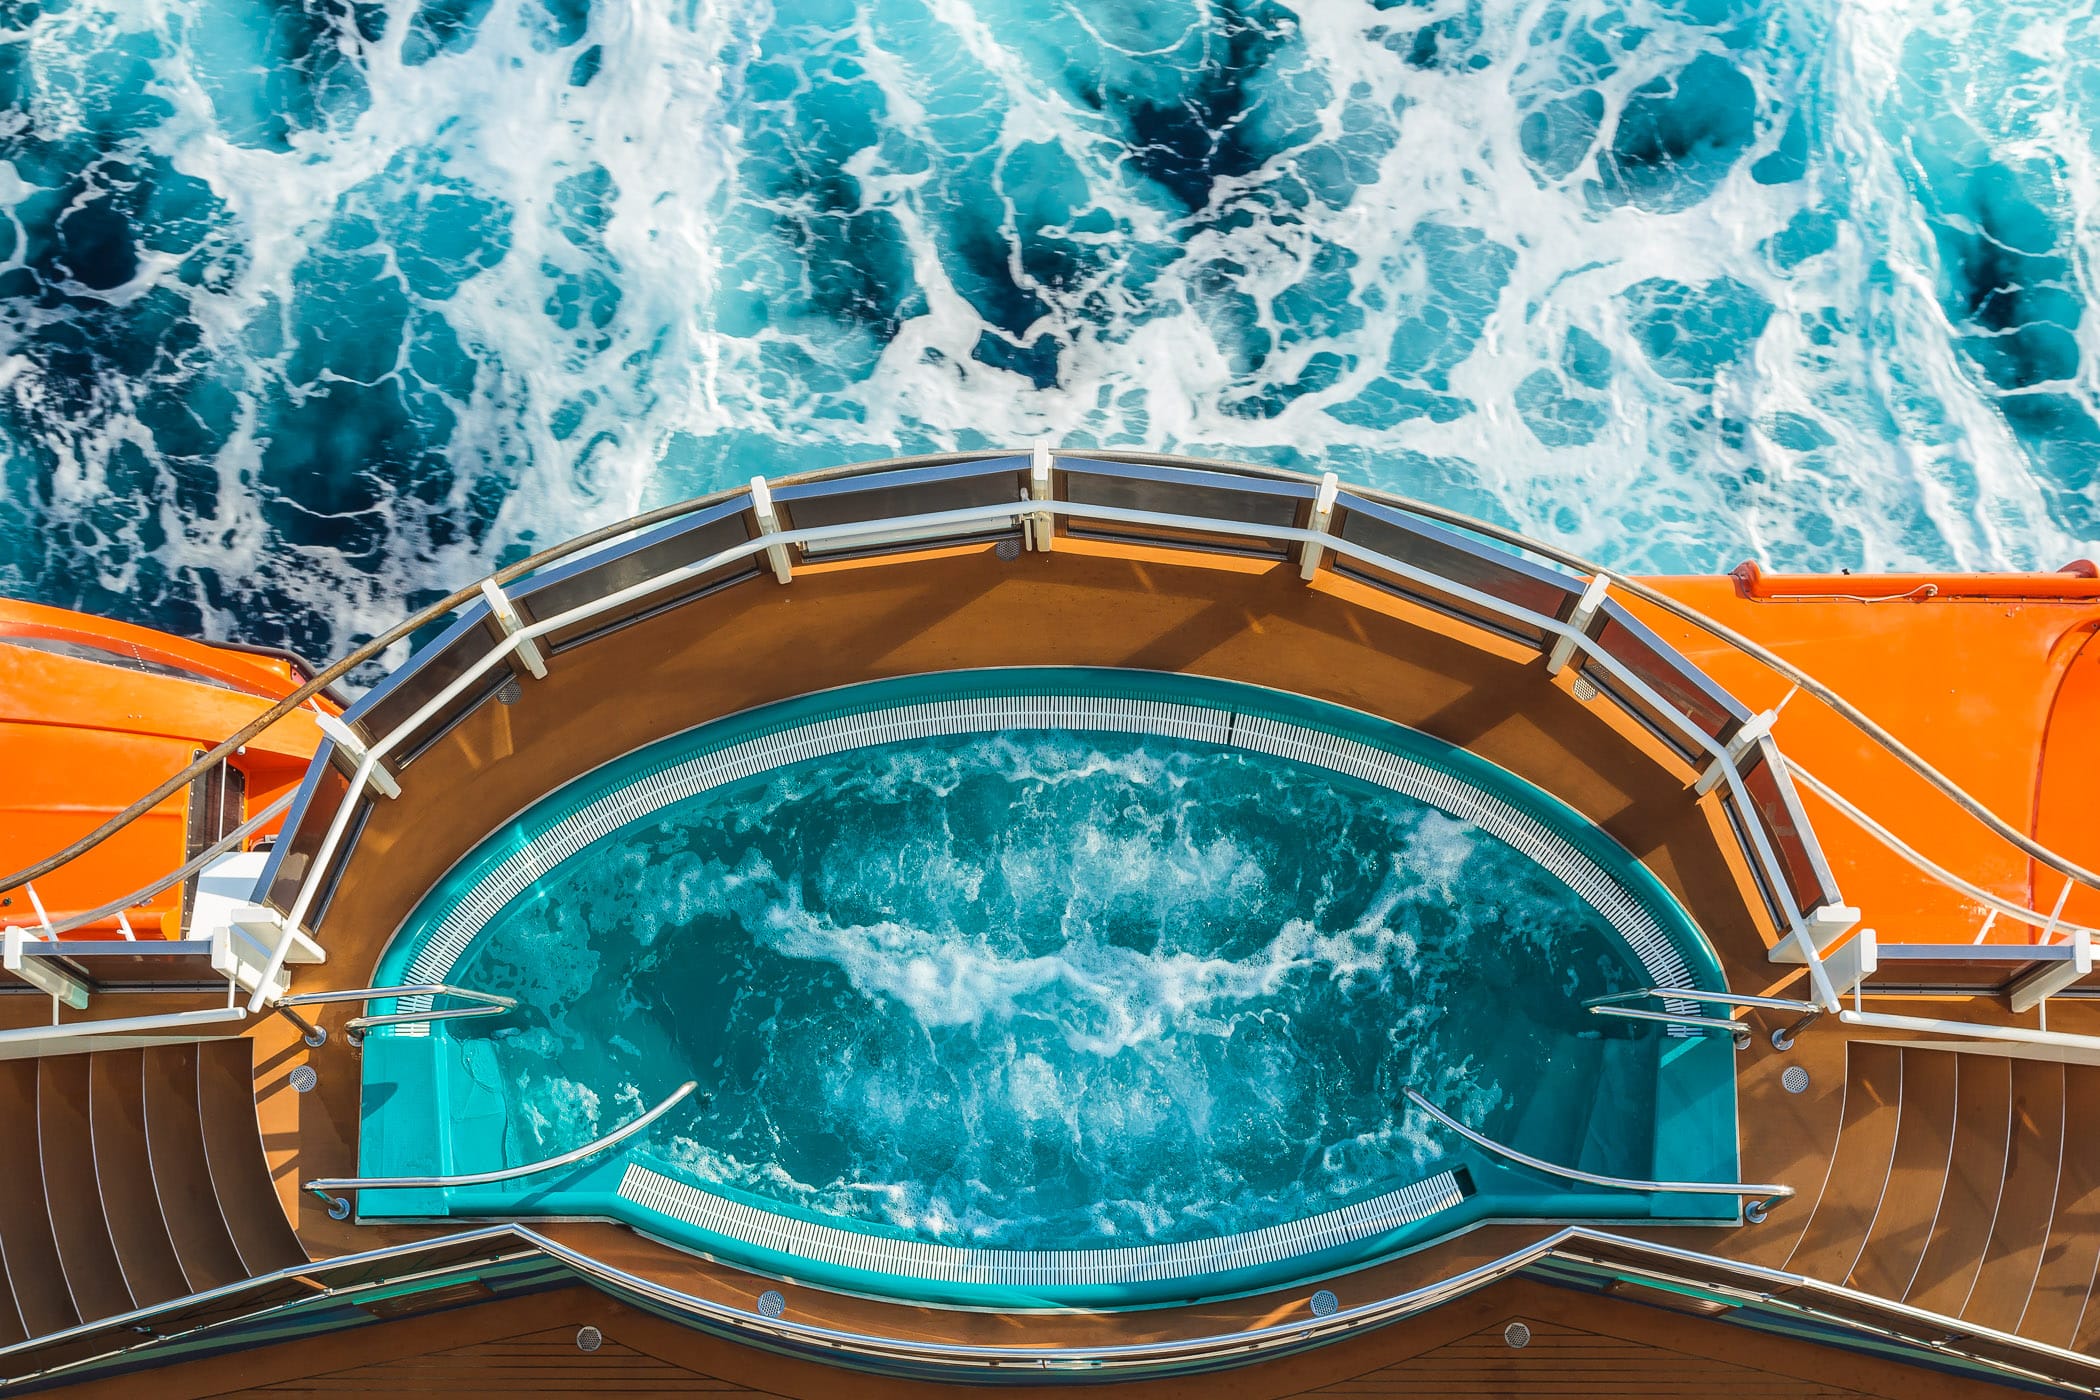 One of the four hot tubs that bulge out over the sea aboard the cruise ship Carnival Magic, as seen from above.